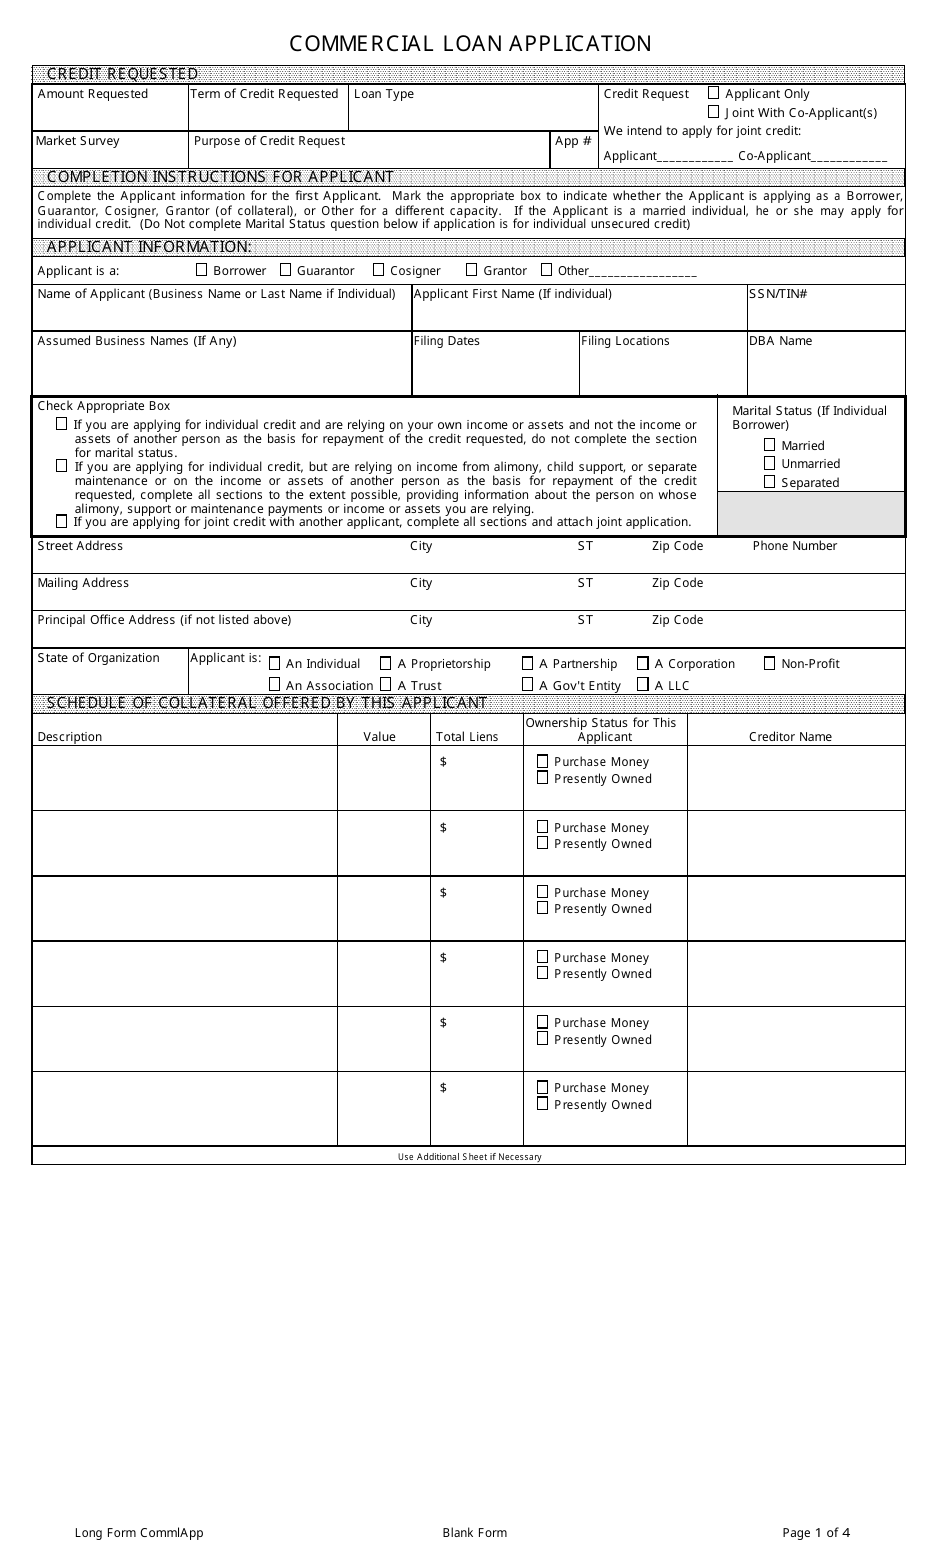 Commercial Loan Application Form, Page 1